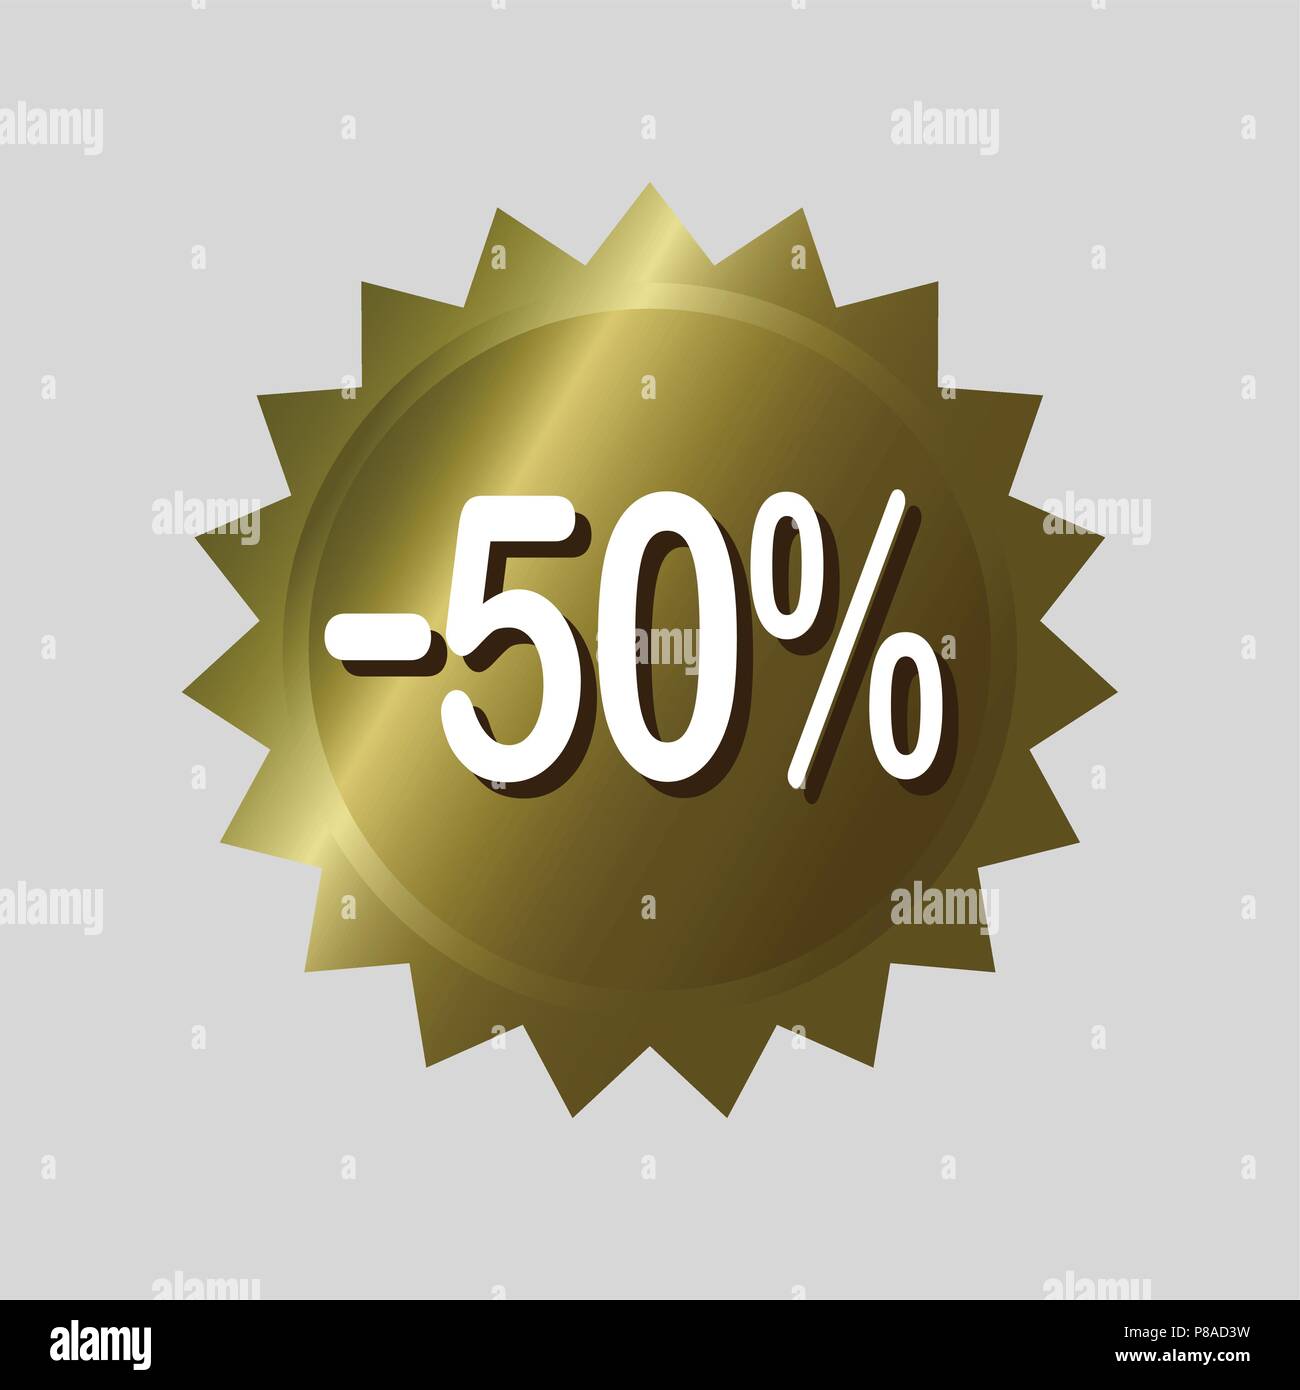 Price tag, '50% off' discount sticker. Golden vector label design on isolated background. Stock Vector